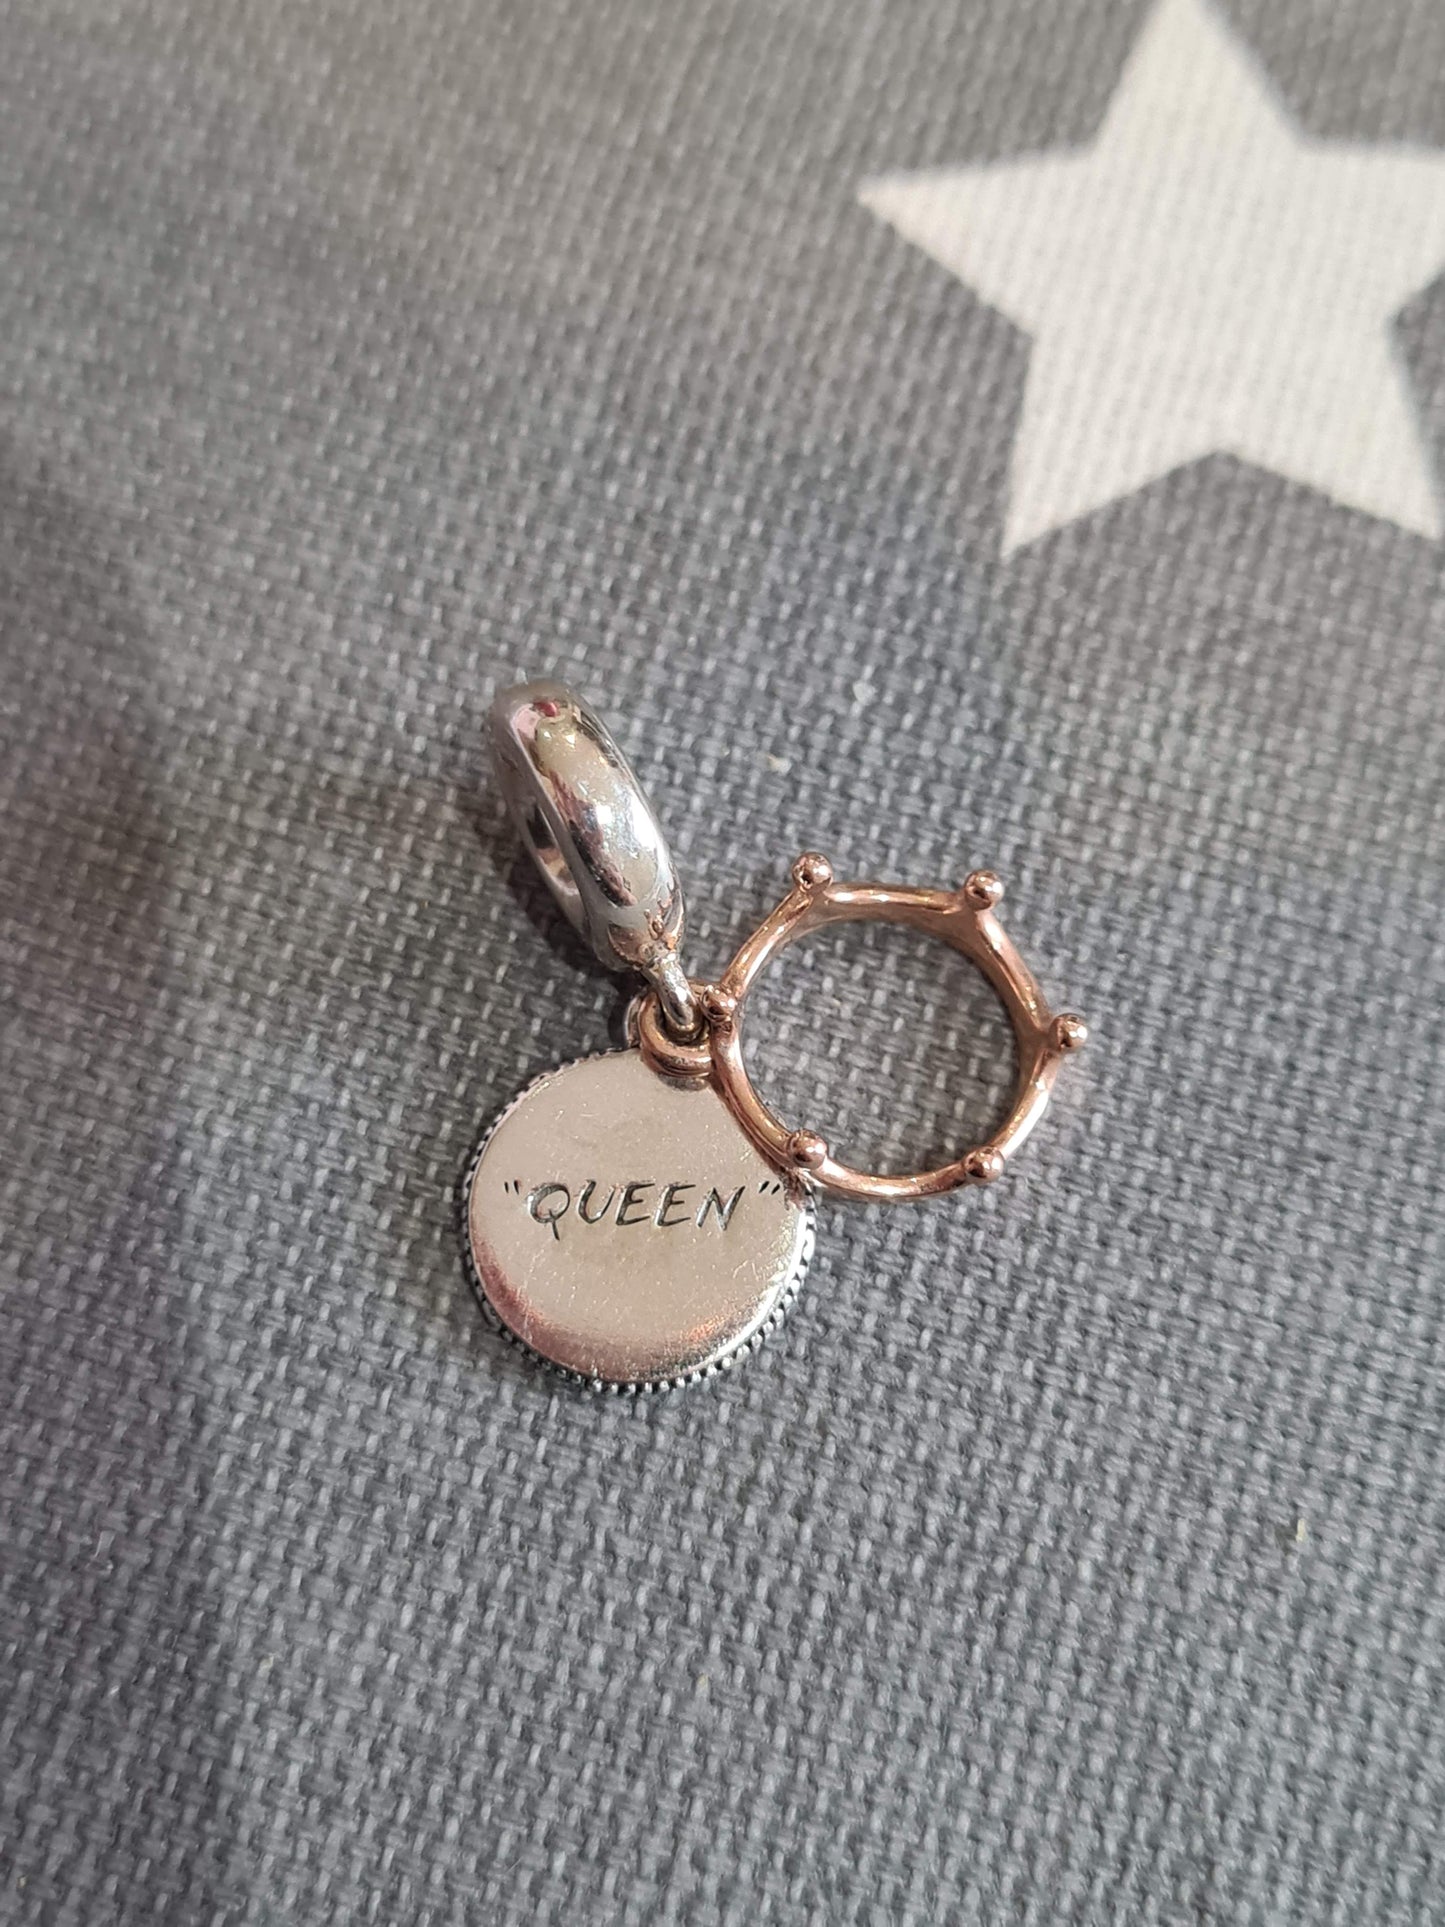 Genuine Pandora Queen Dangle with Rose Gold Crown Charm